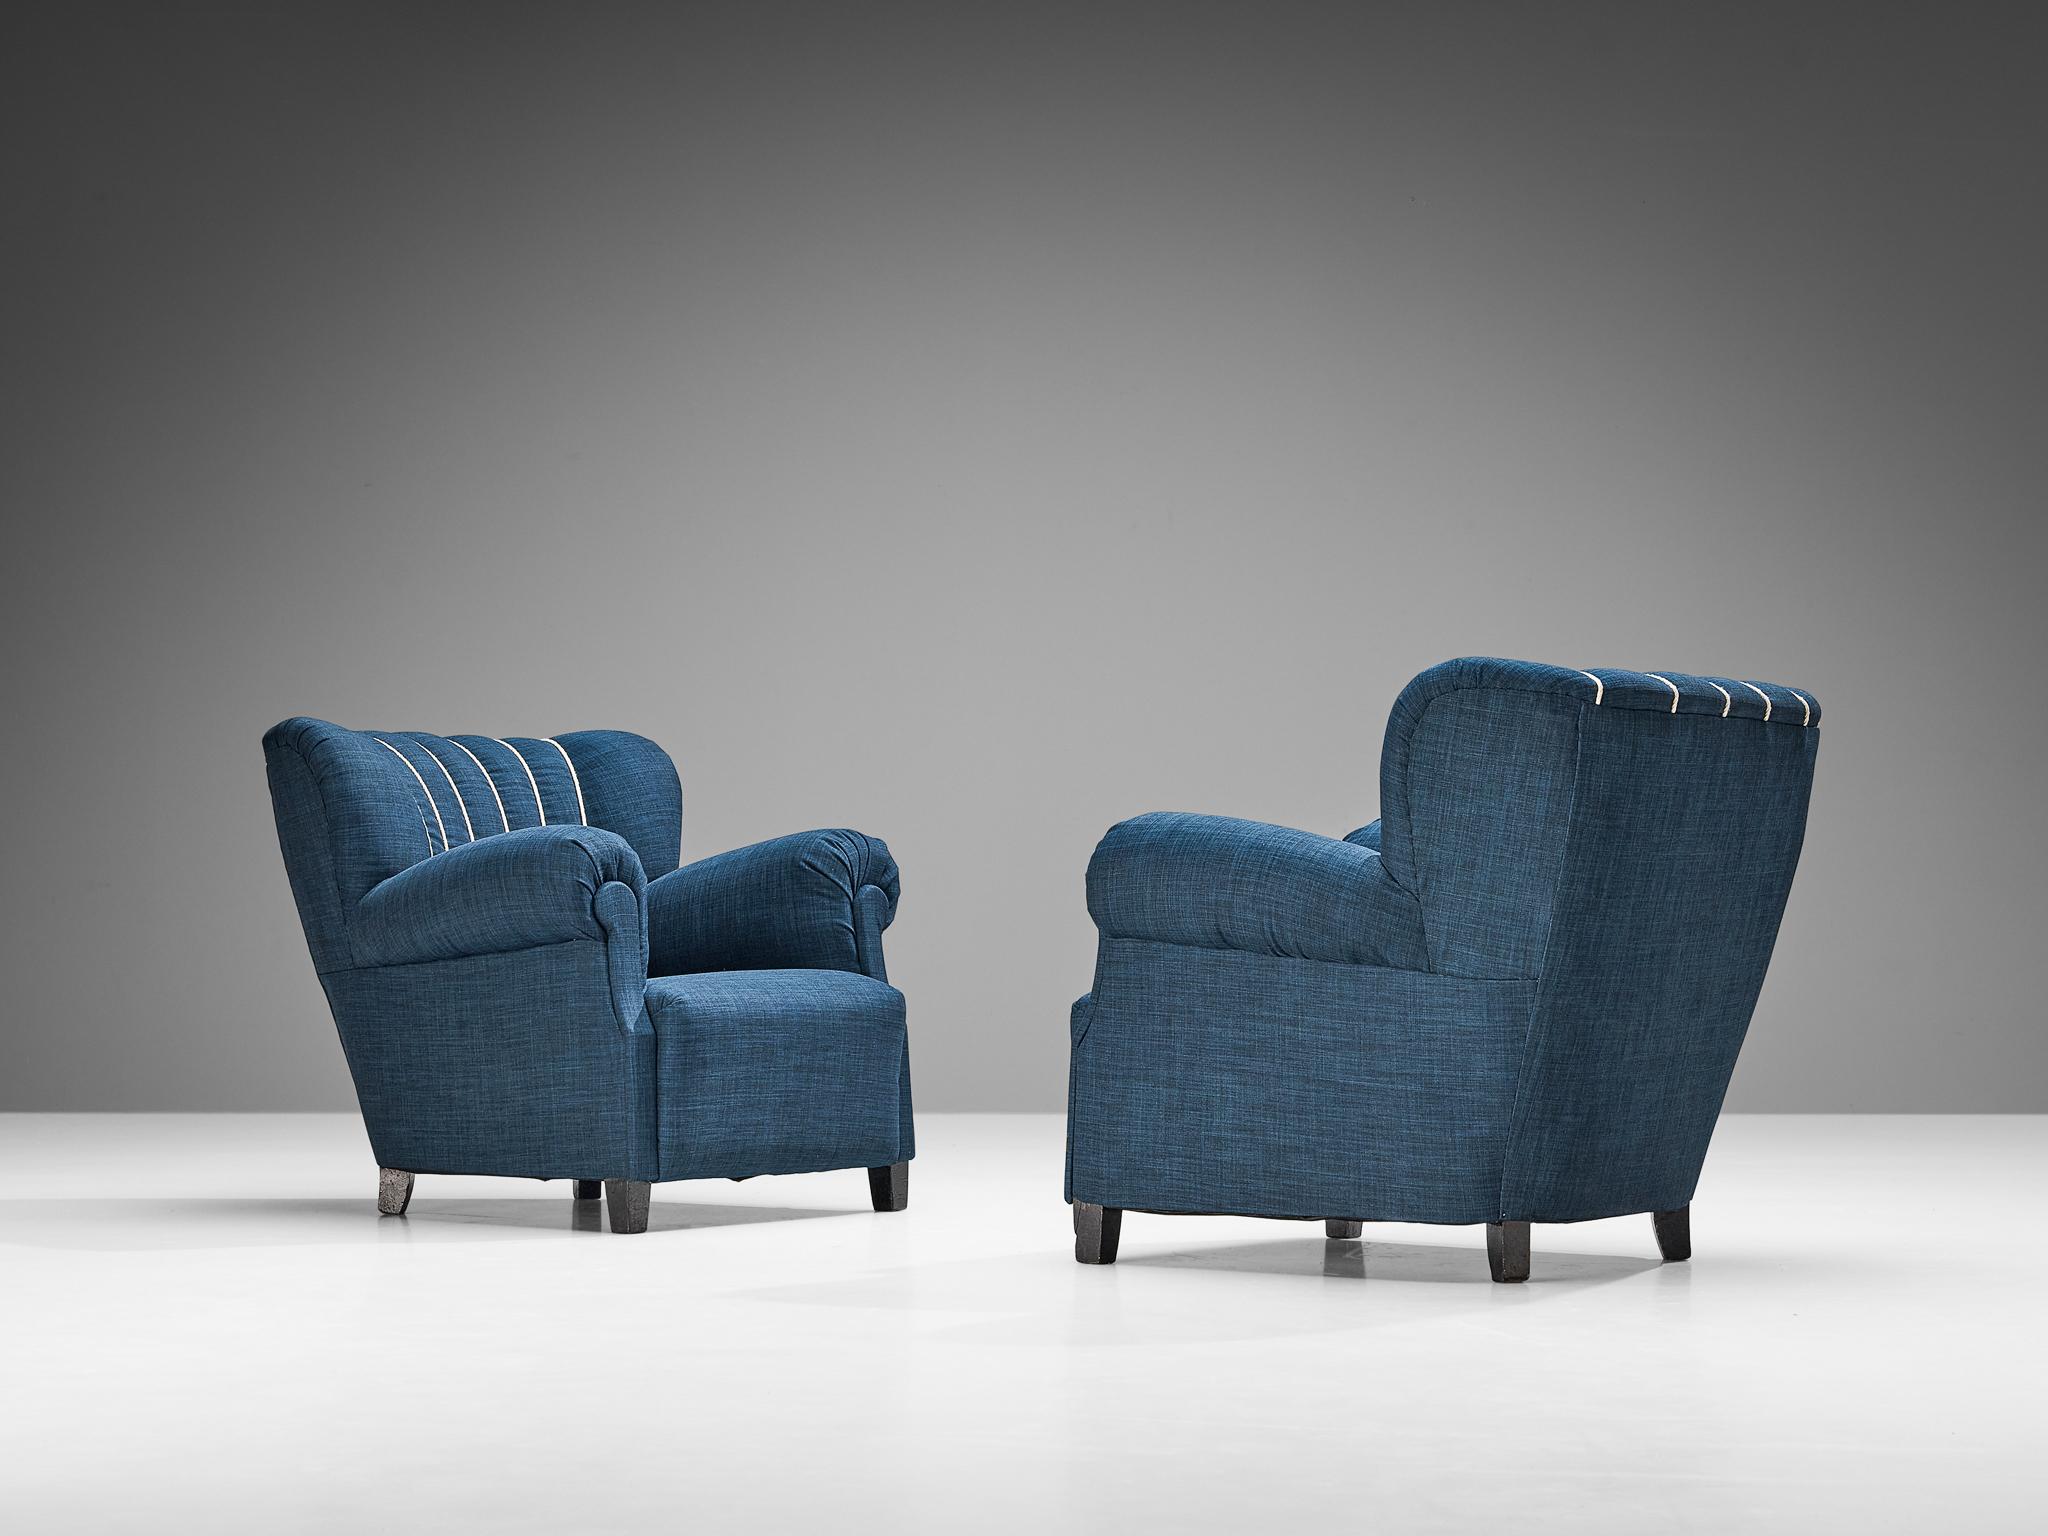 European Pair of Art Deco Lounge Chairs in Blue Upholstery For Sale